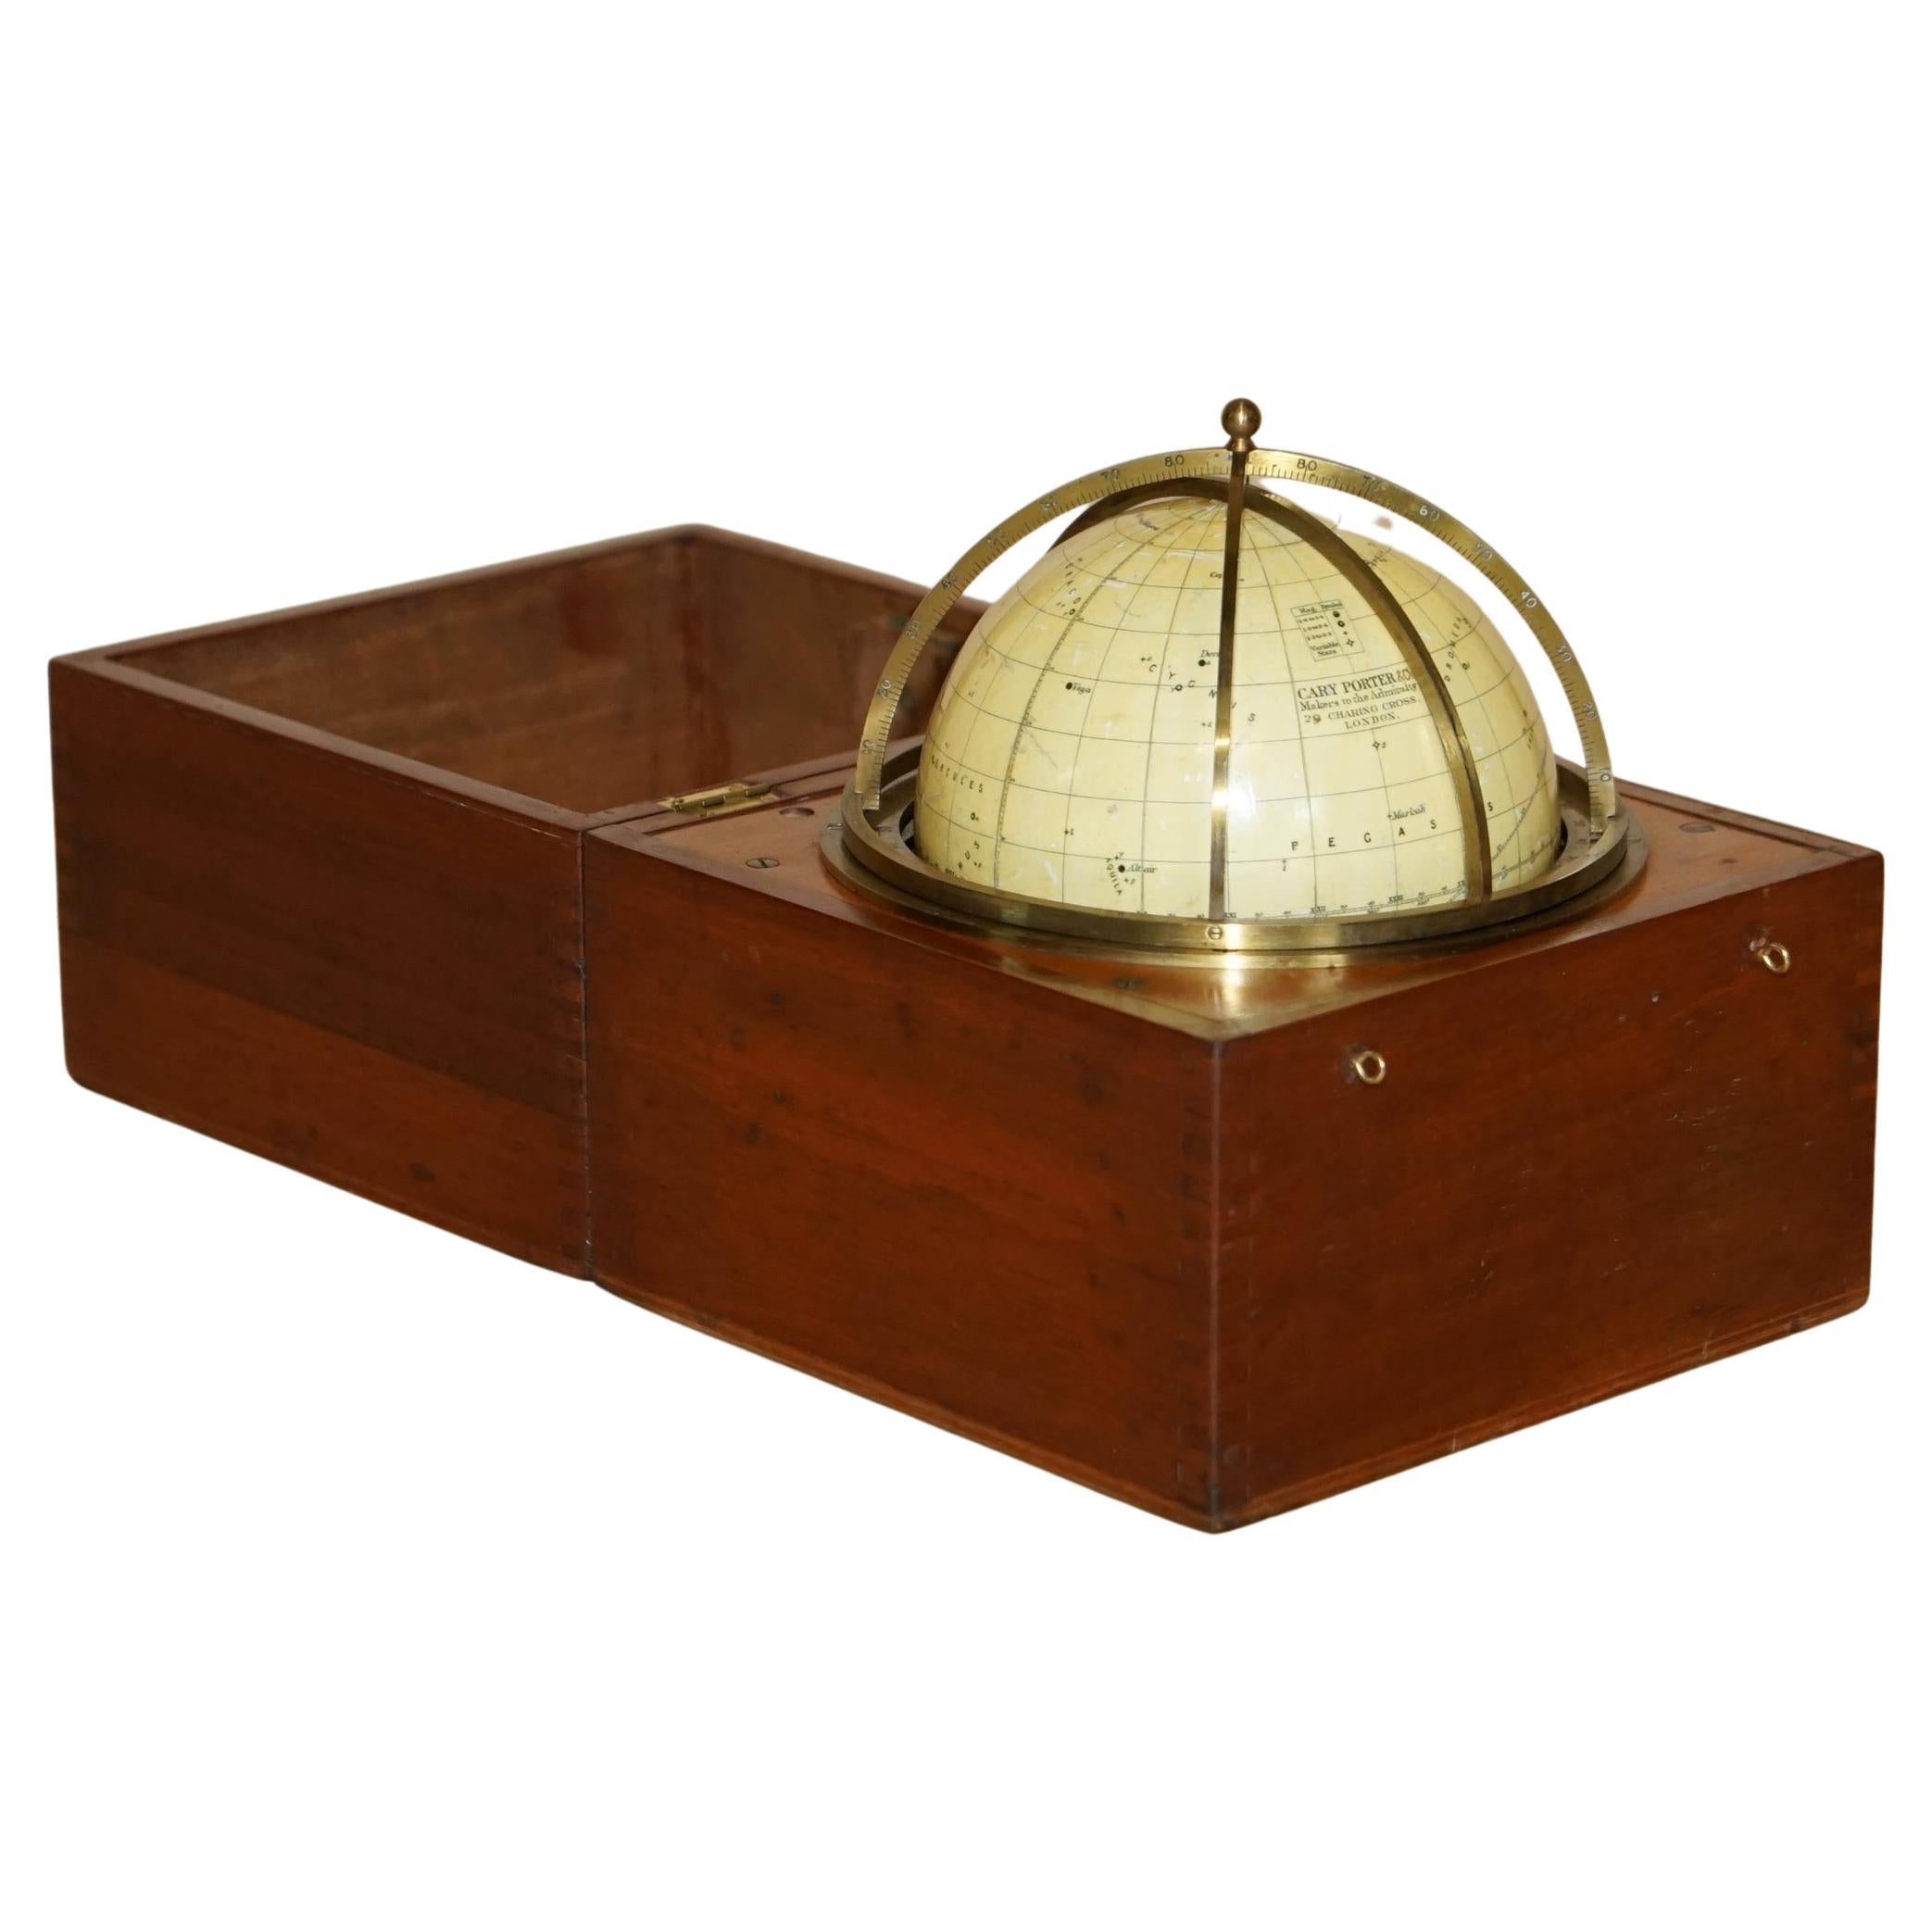 John Cary Travel Celestial Globe in Box Marked Cary & Co London, No. 21540 For Sale